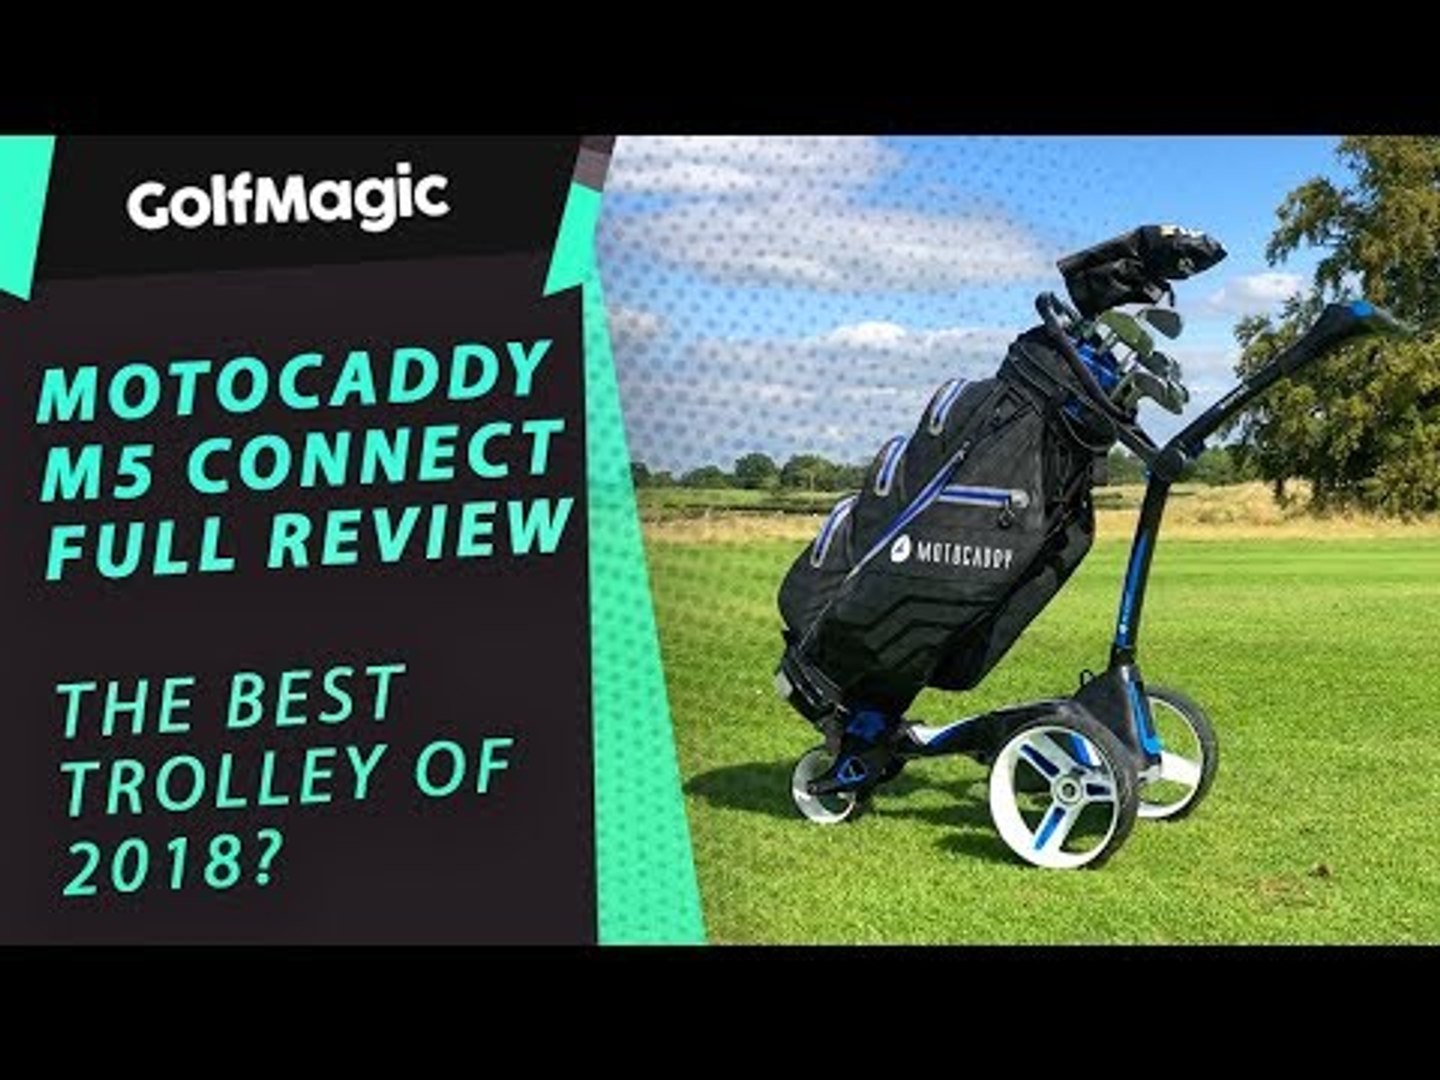 Motocaddy M5 CONNECT Electric Golf Trolley | FULL REVIEW - video Dailymotion